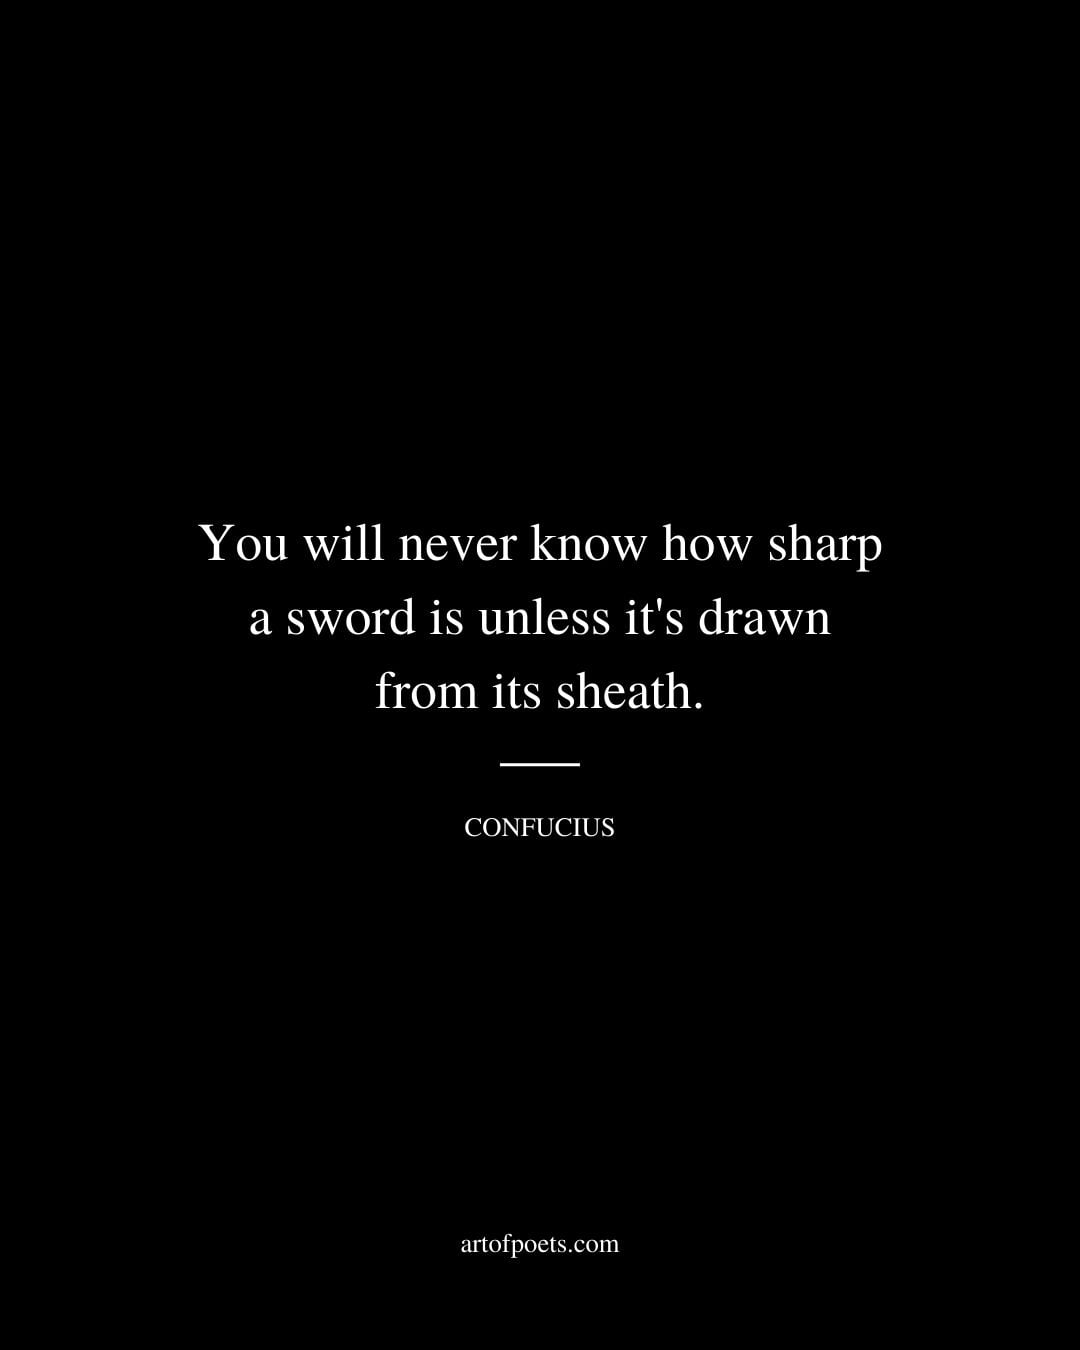 You will never know how sharp a sword is unless its drawn from its sheath